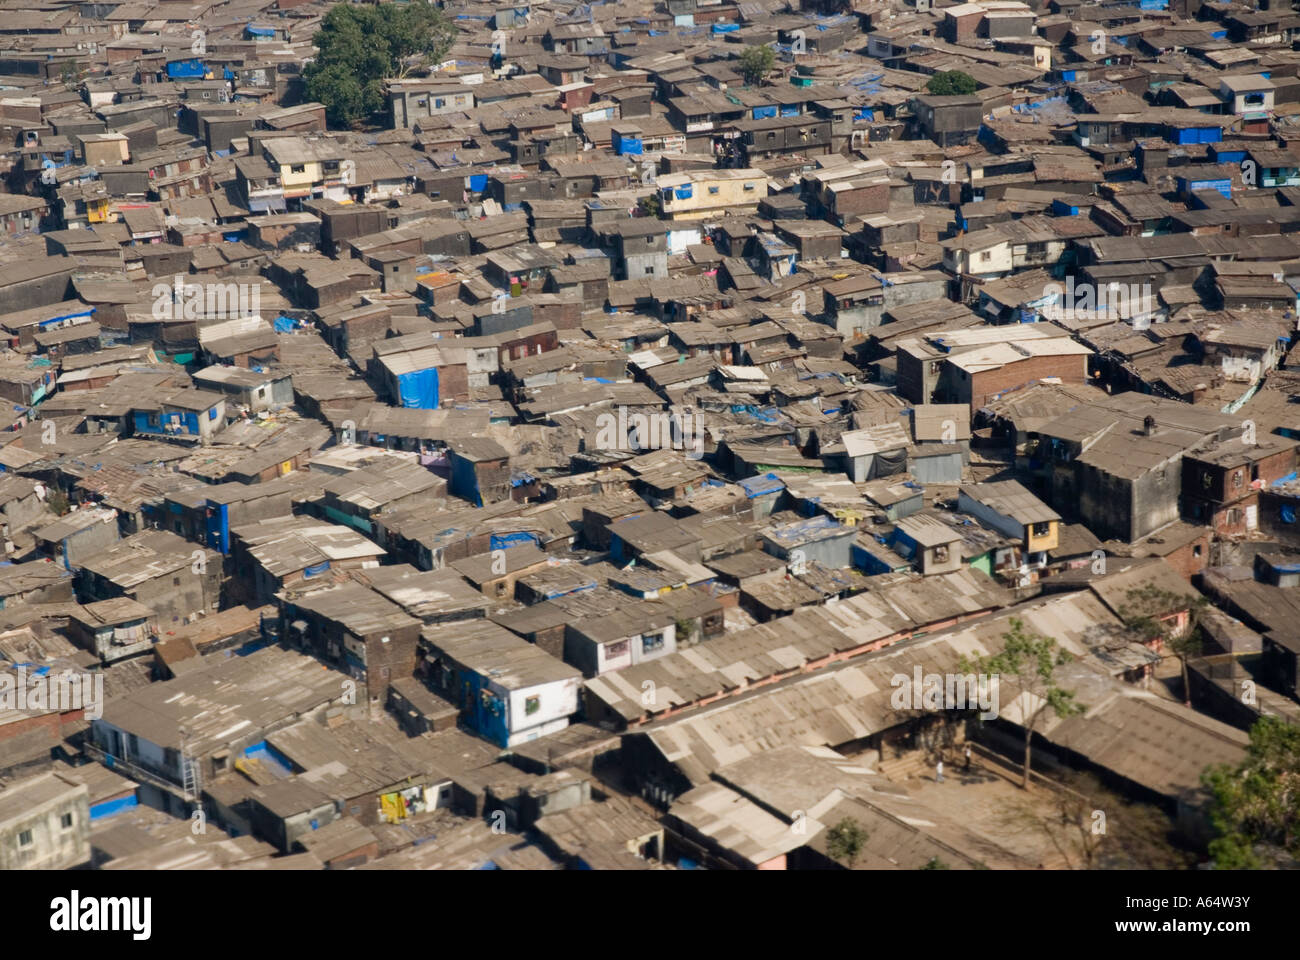 an-aerial-view-of-dharavi-slum-area-in-mumbai-india-which-is-the-largest-A64W3Y.jpg